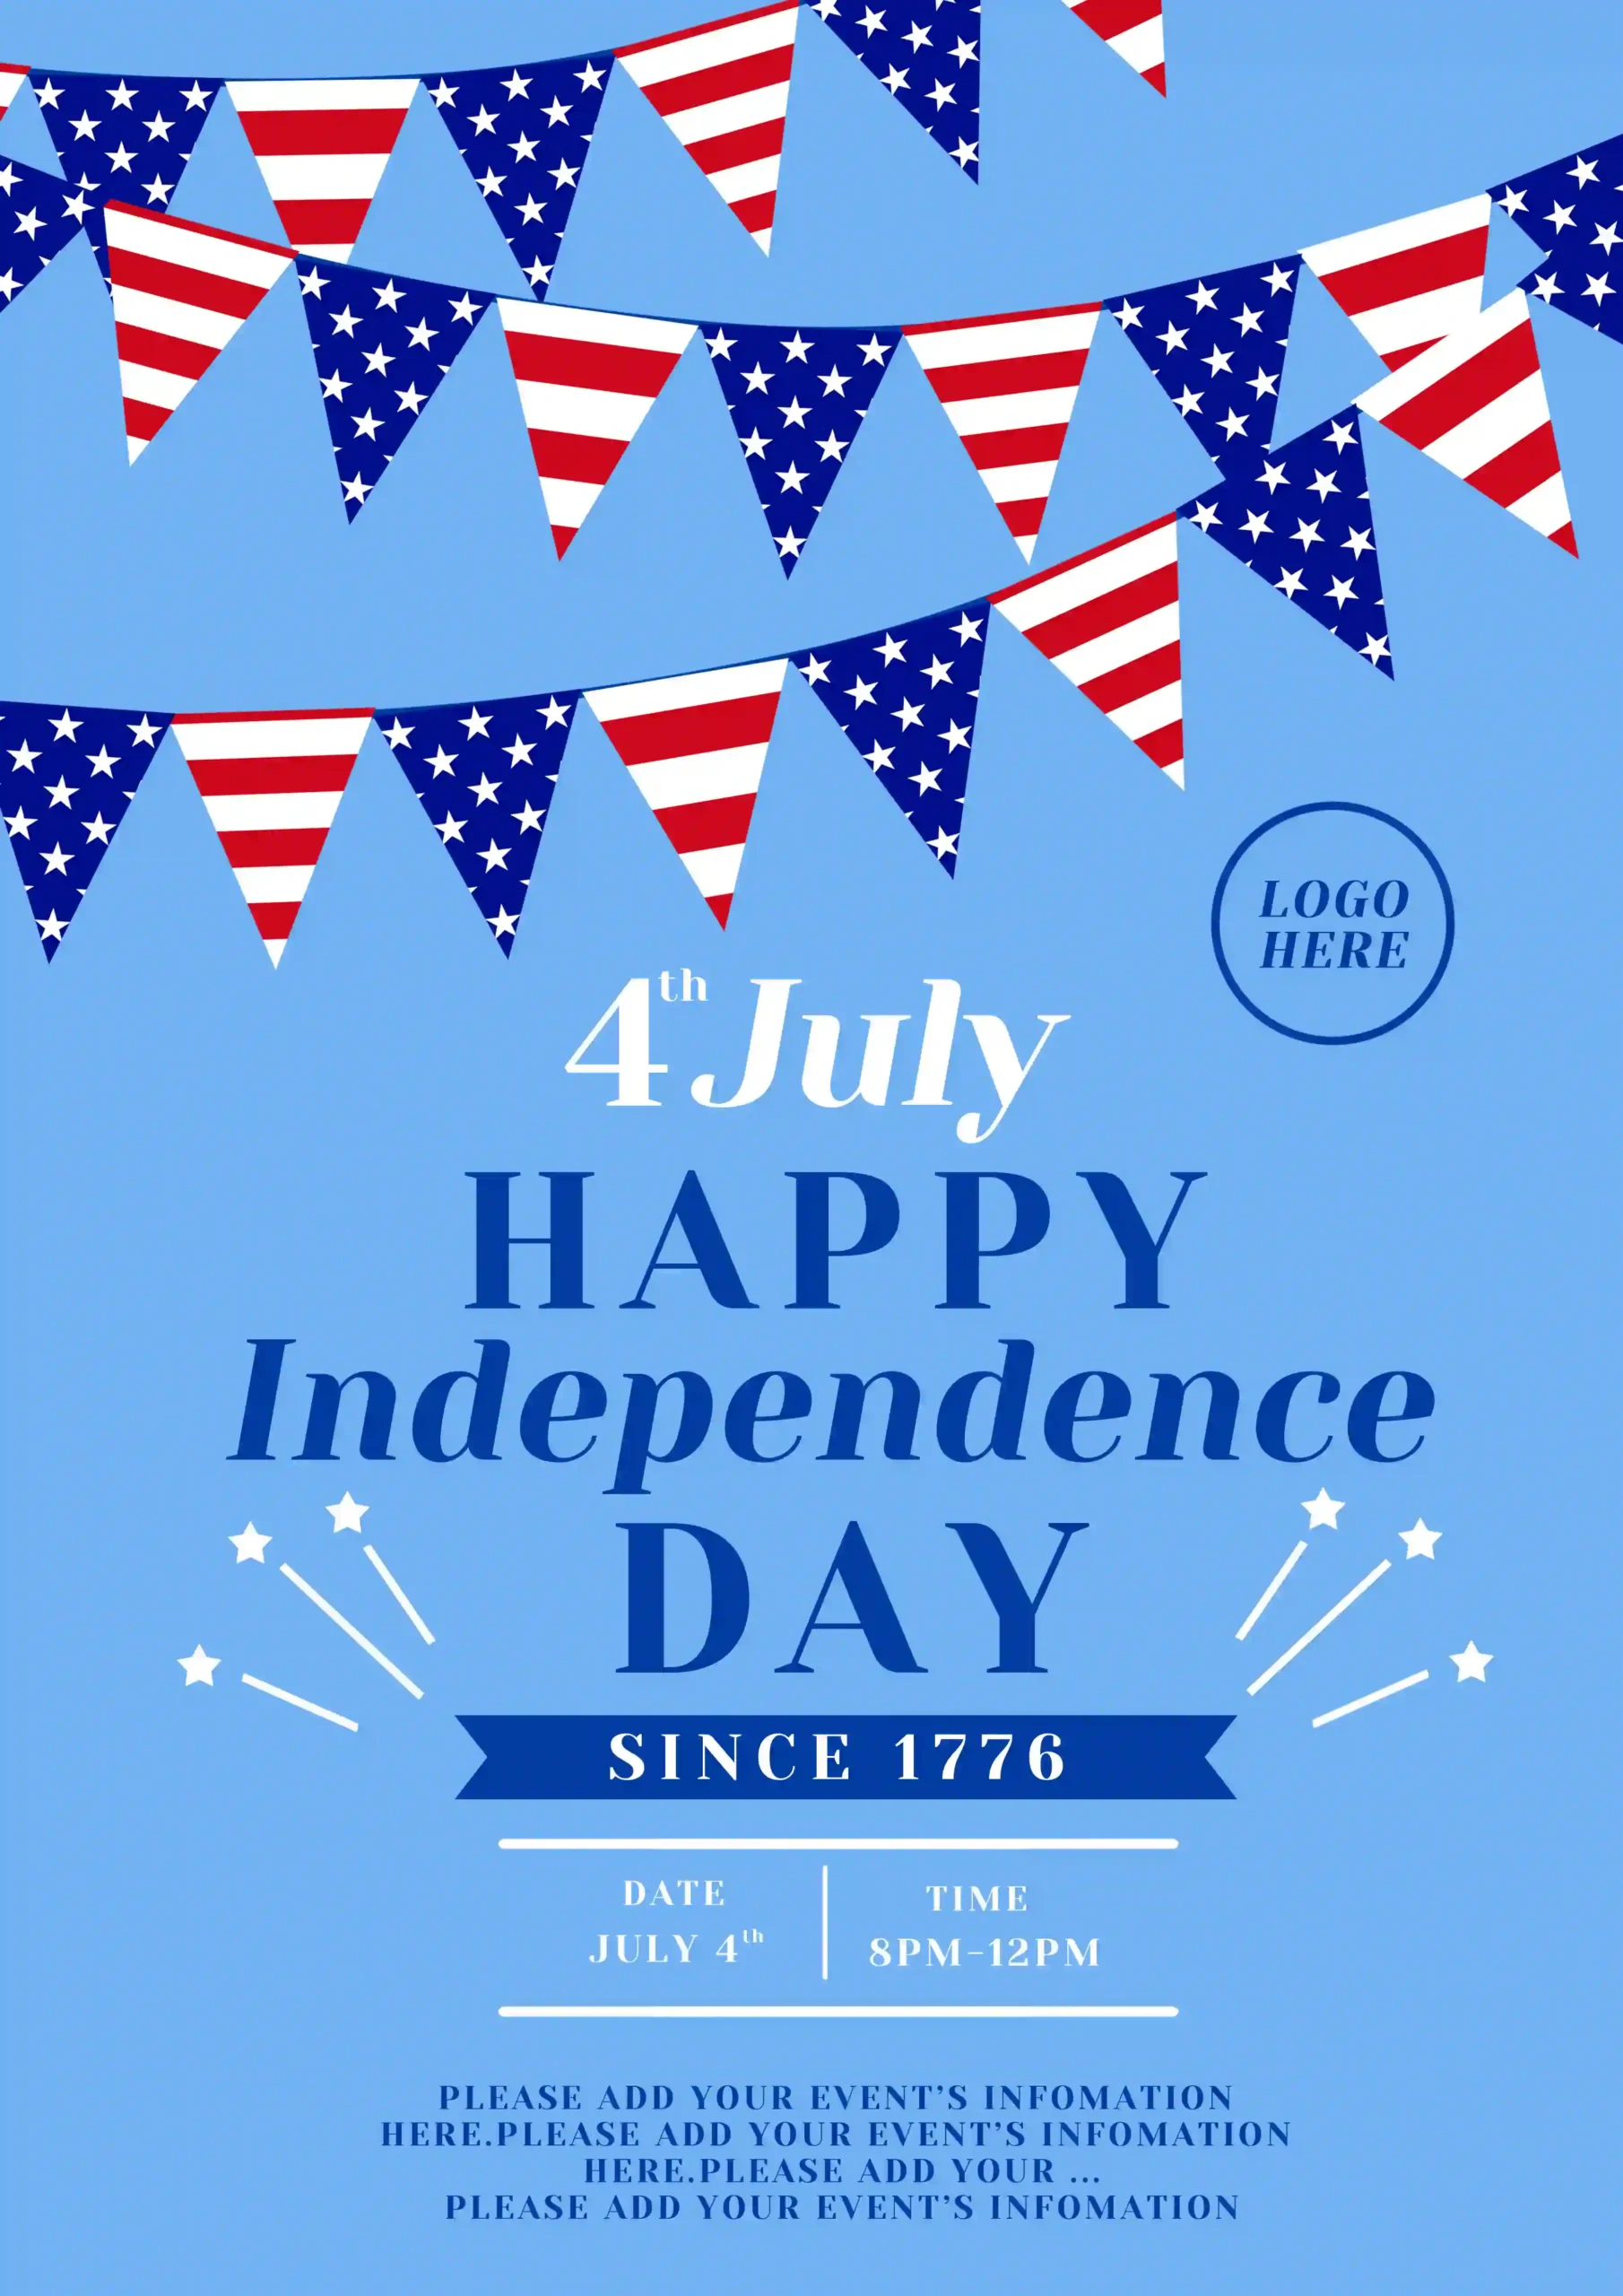 Blue Bunting American Independence Day Poster PSD Free Download